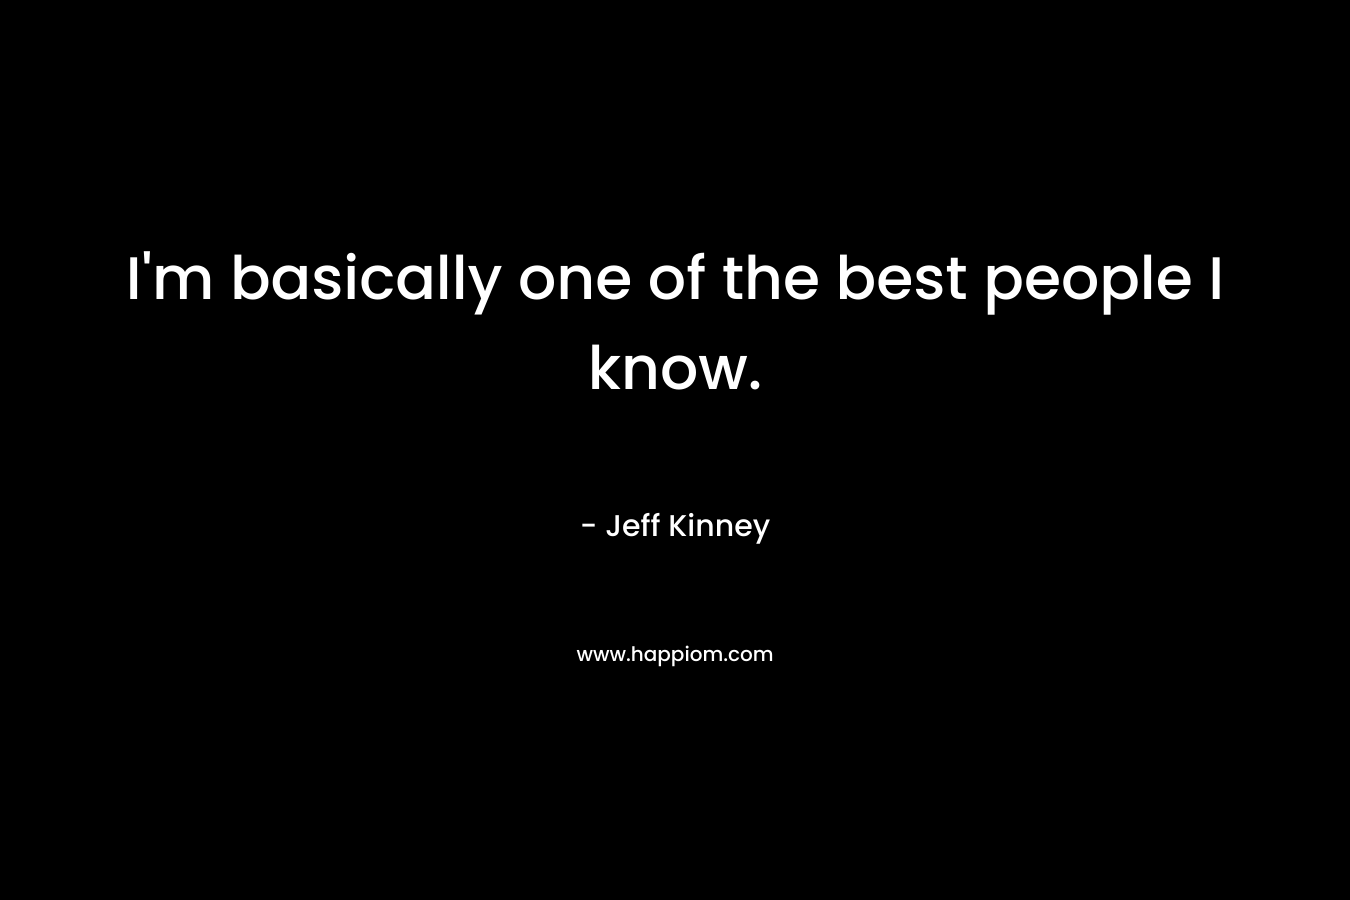 I’m basically one of the best people I know. – Jeff Kinney